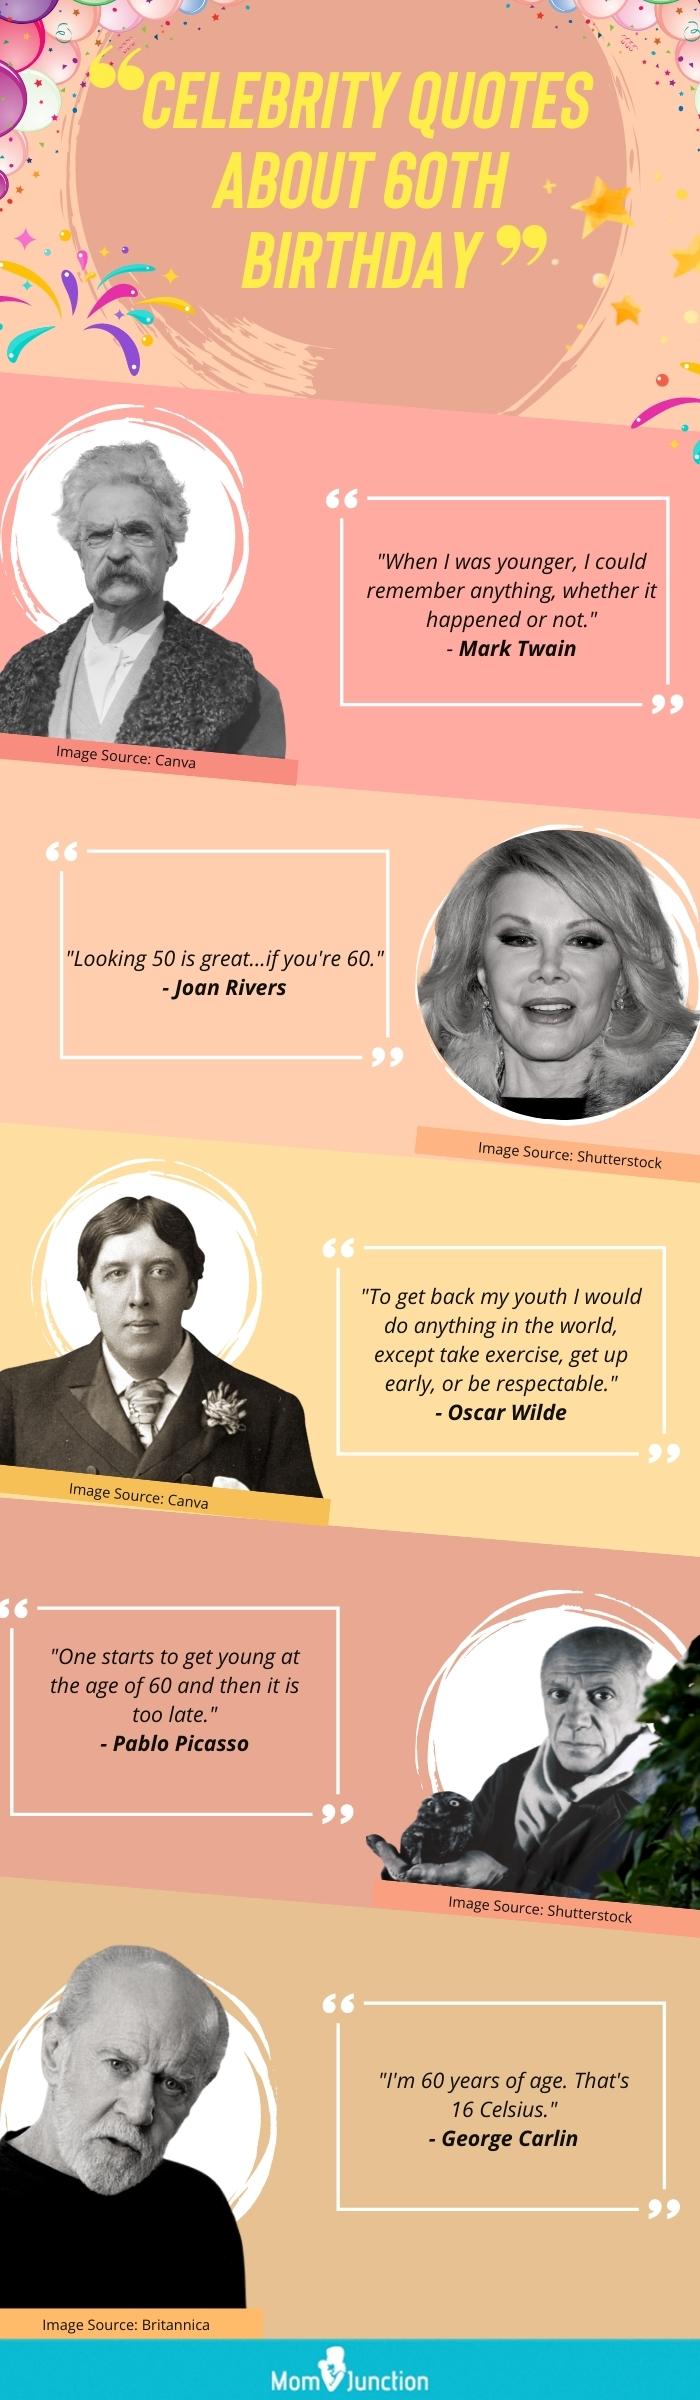 celebrity quotes about 60th birthday [infographic]